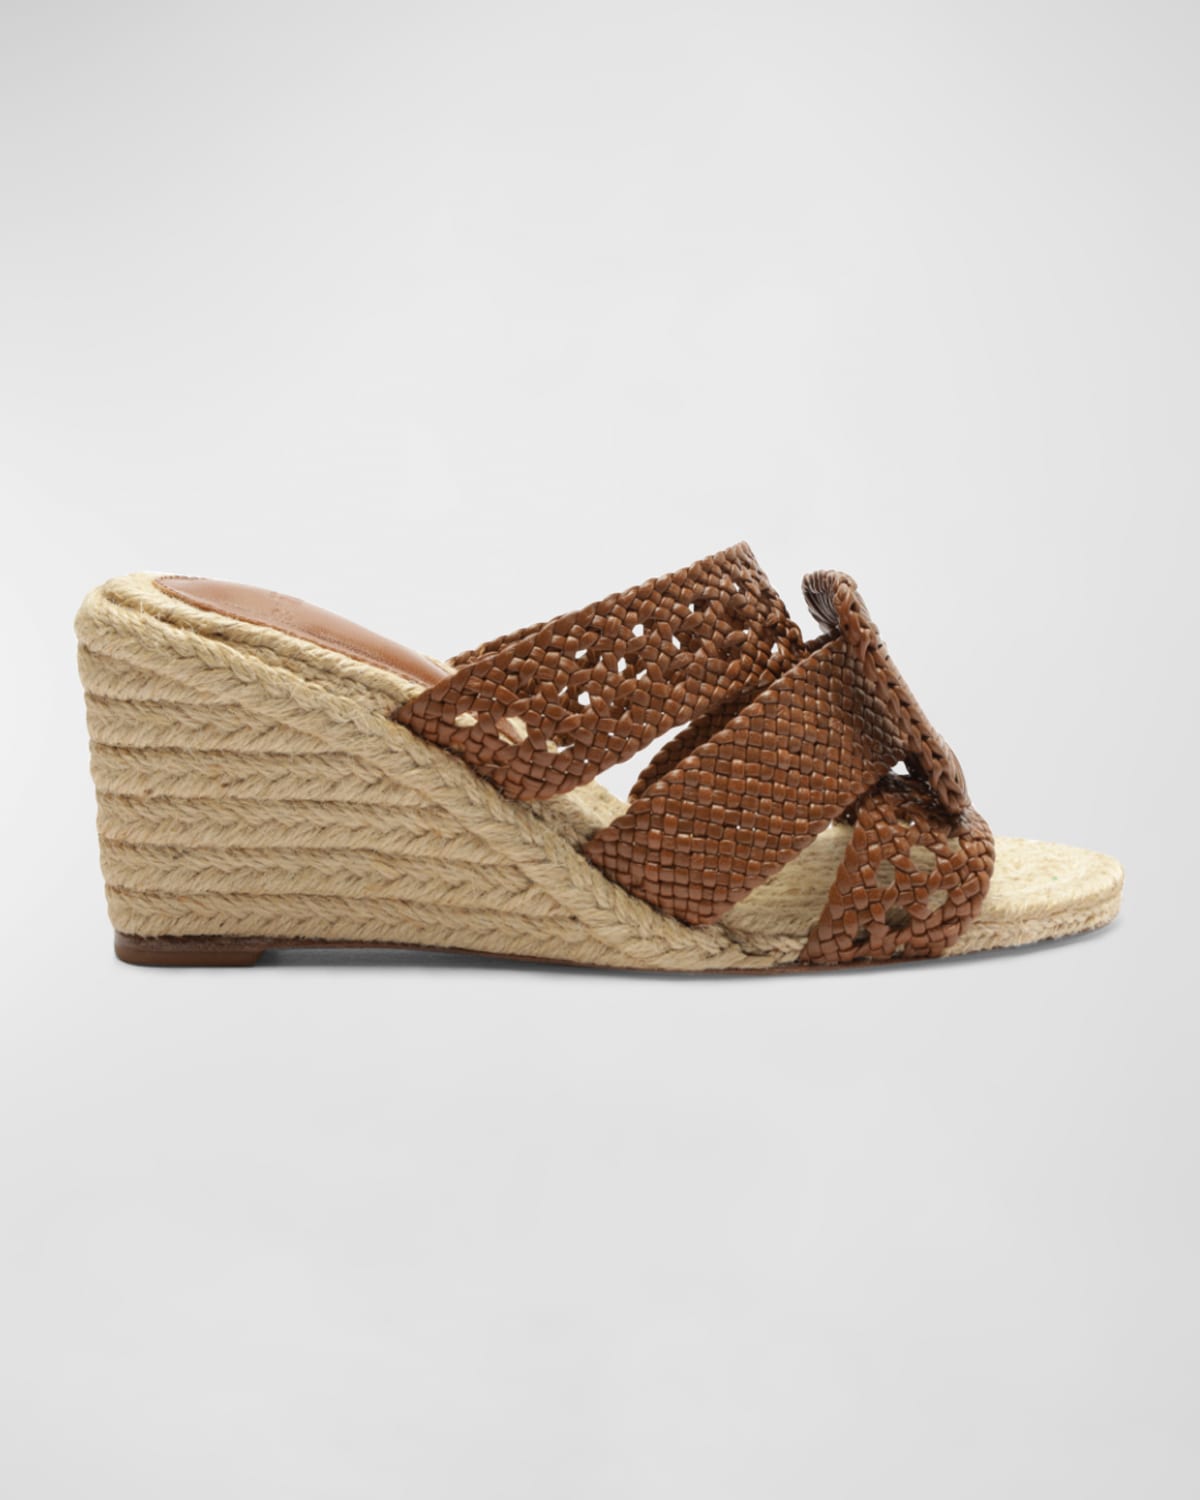 Lana Woven Leather Wedge Espadrilles